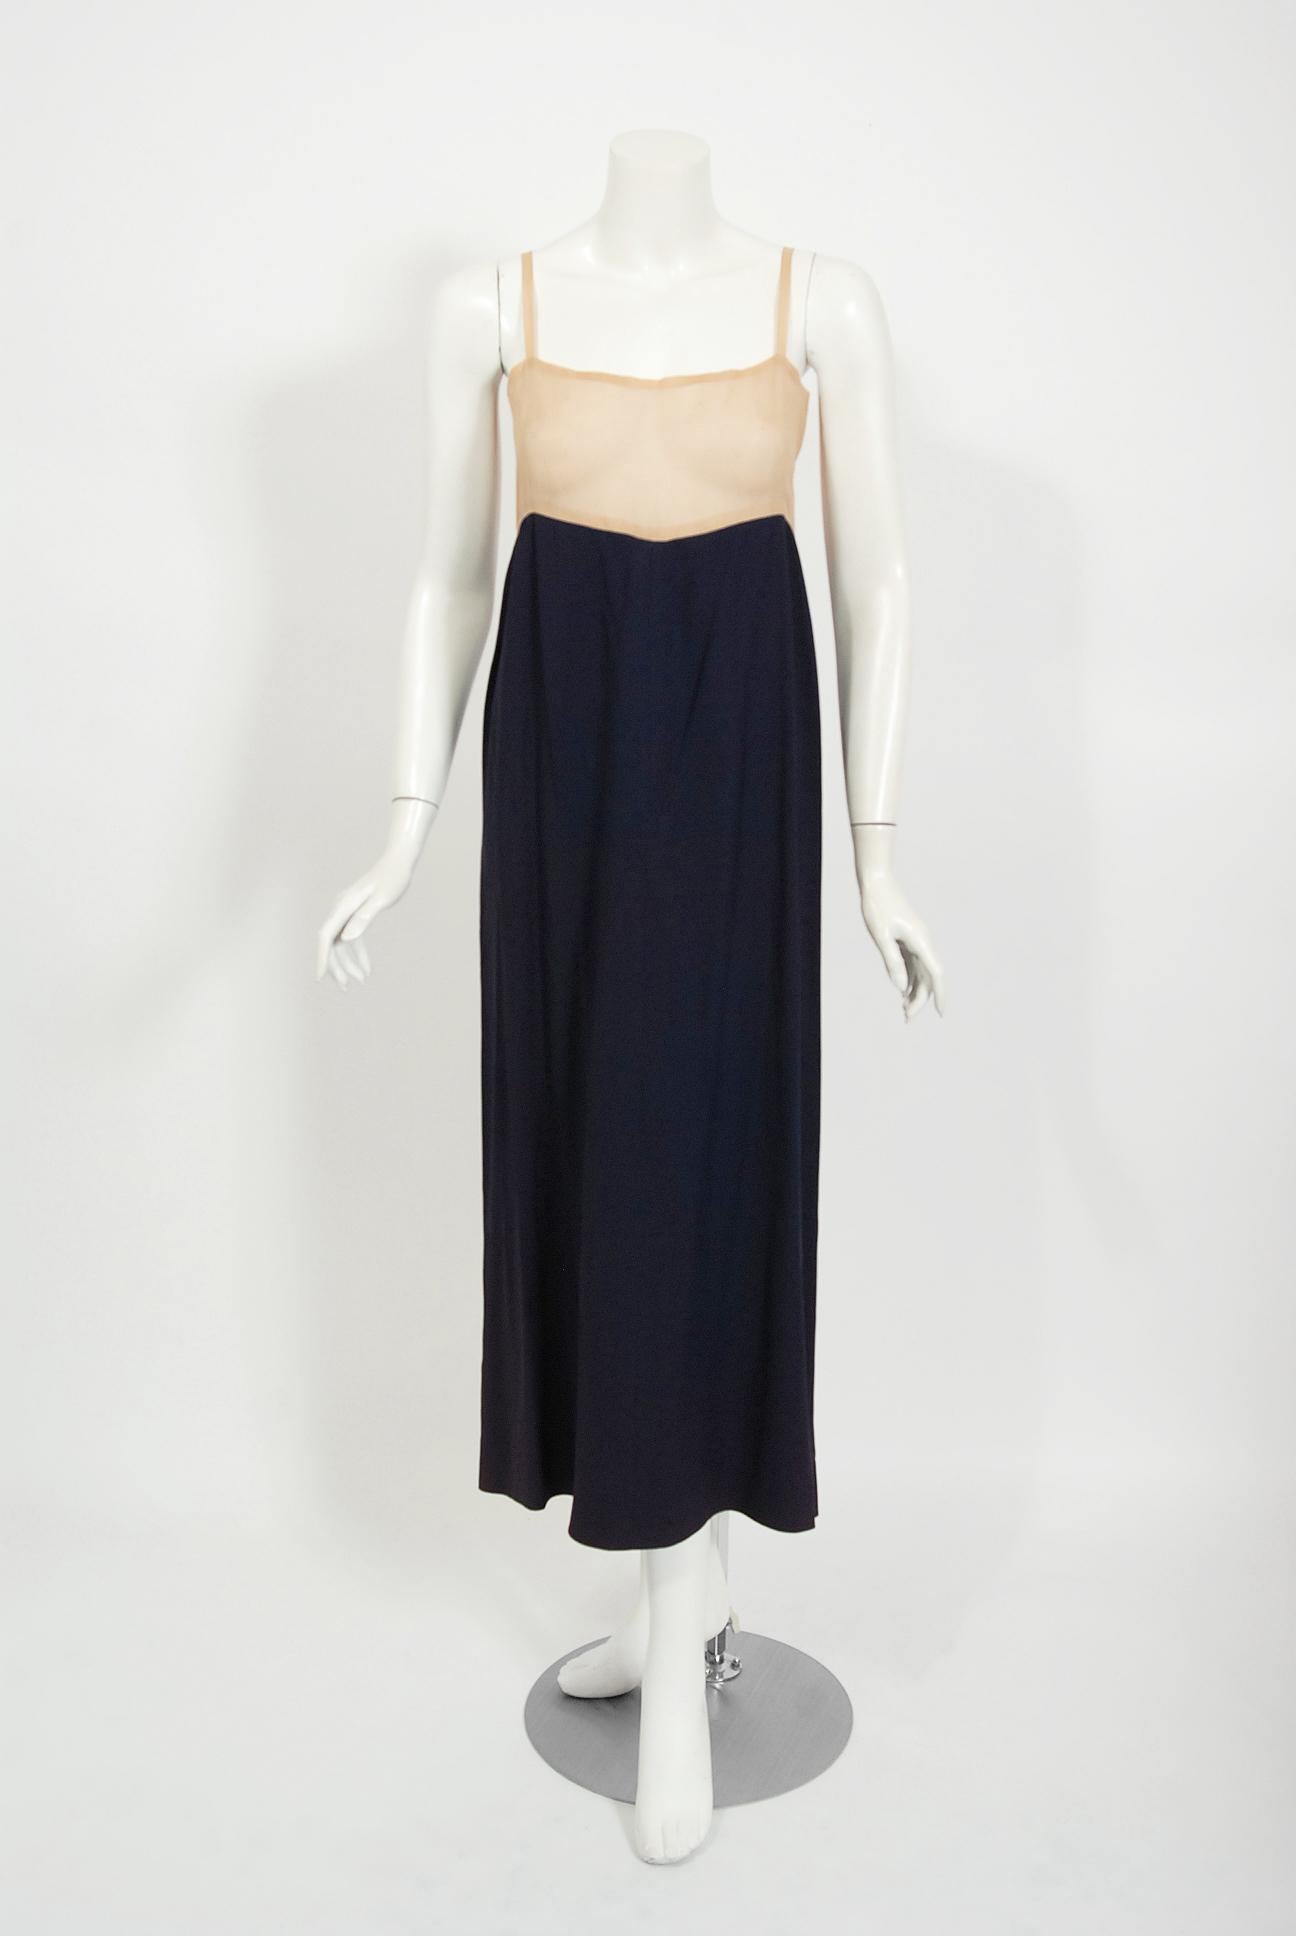 Vintage 1970s Madame Grès Haute Couture Beaded Berry Motif Navy Sheer Silk Gown For Sale 4